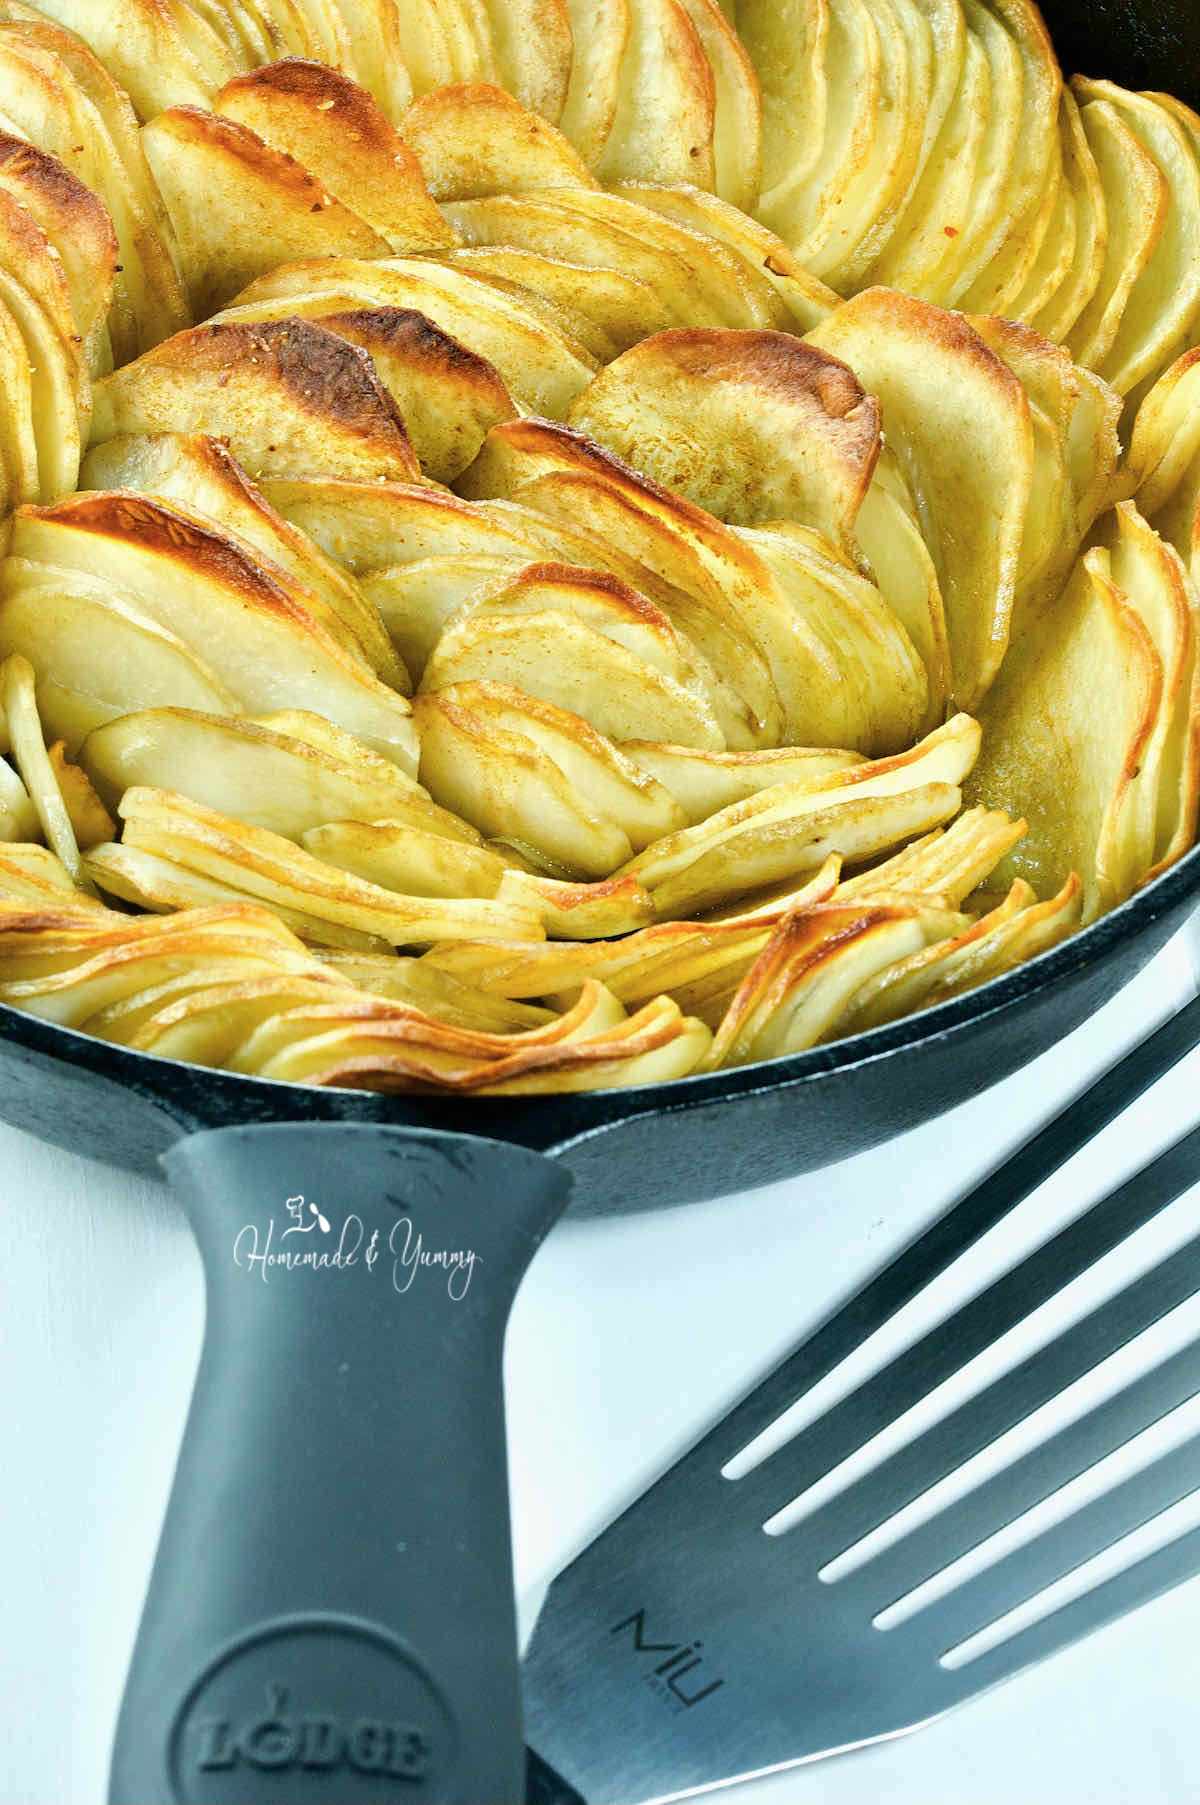 Sliced potatoes in a cast iron skillet.